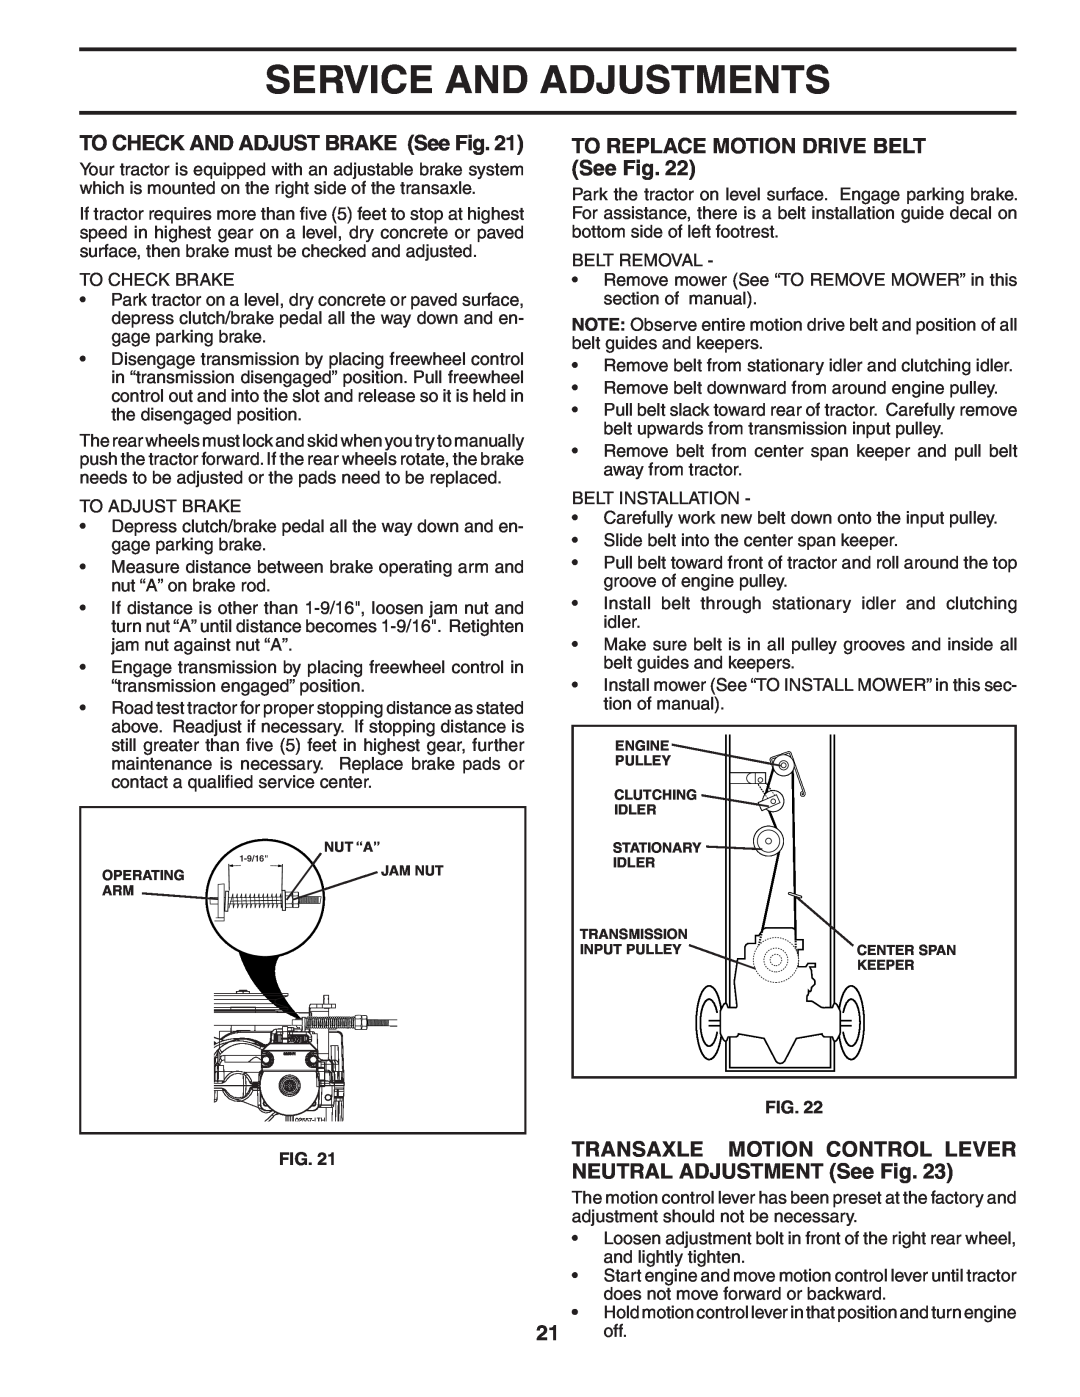 Poulan 405385 TO CHECK AND ADJUST BRAKE See Fig, TO REPLACE MOTION DRIVE BELT See Fig, Service And Adjustments, Nut “A” 